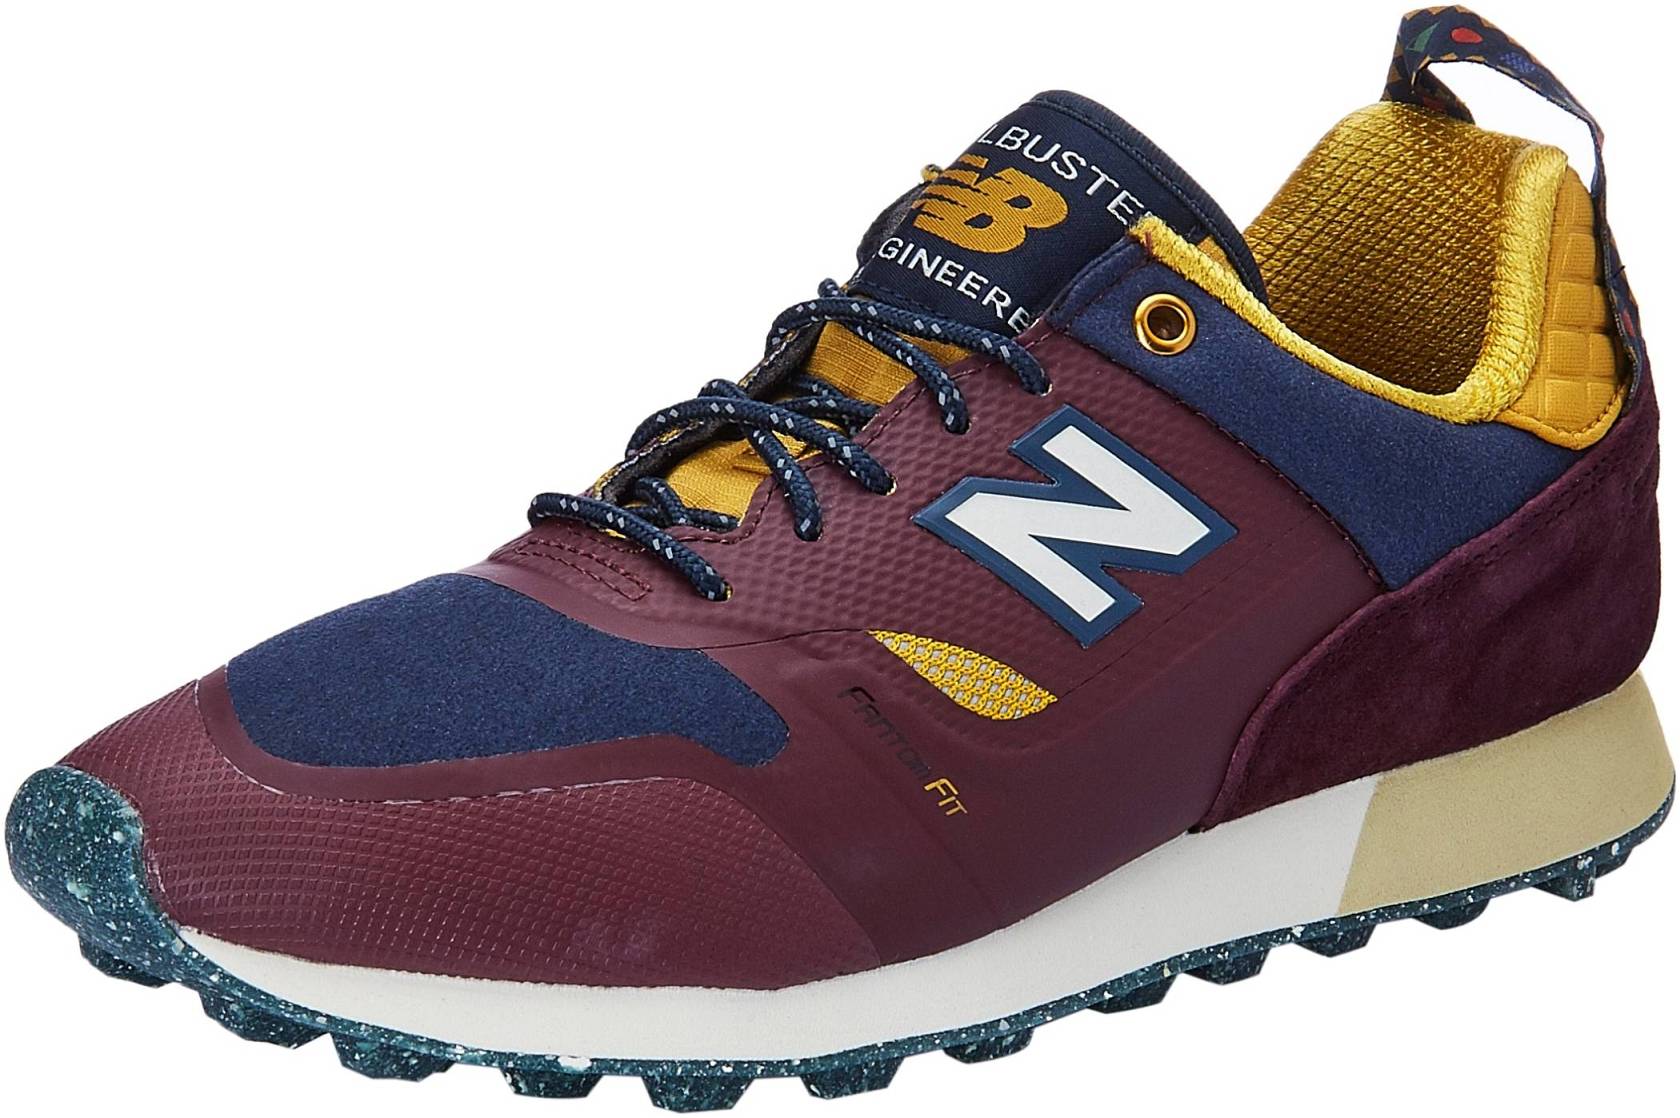 New Balance Trailbuster Re-Engineered 